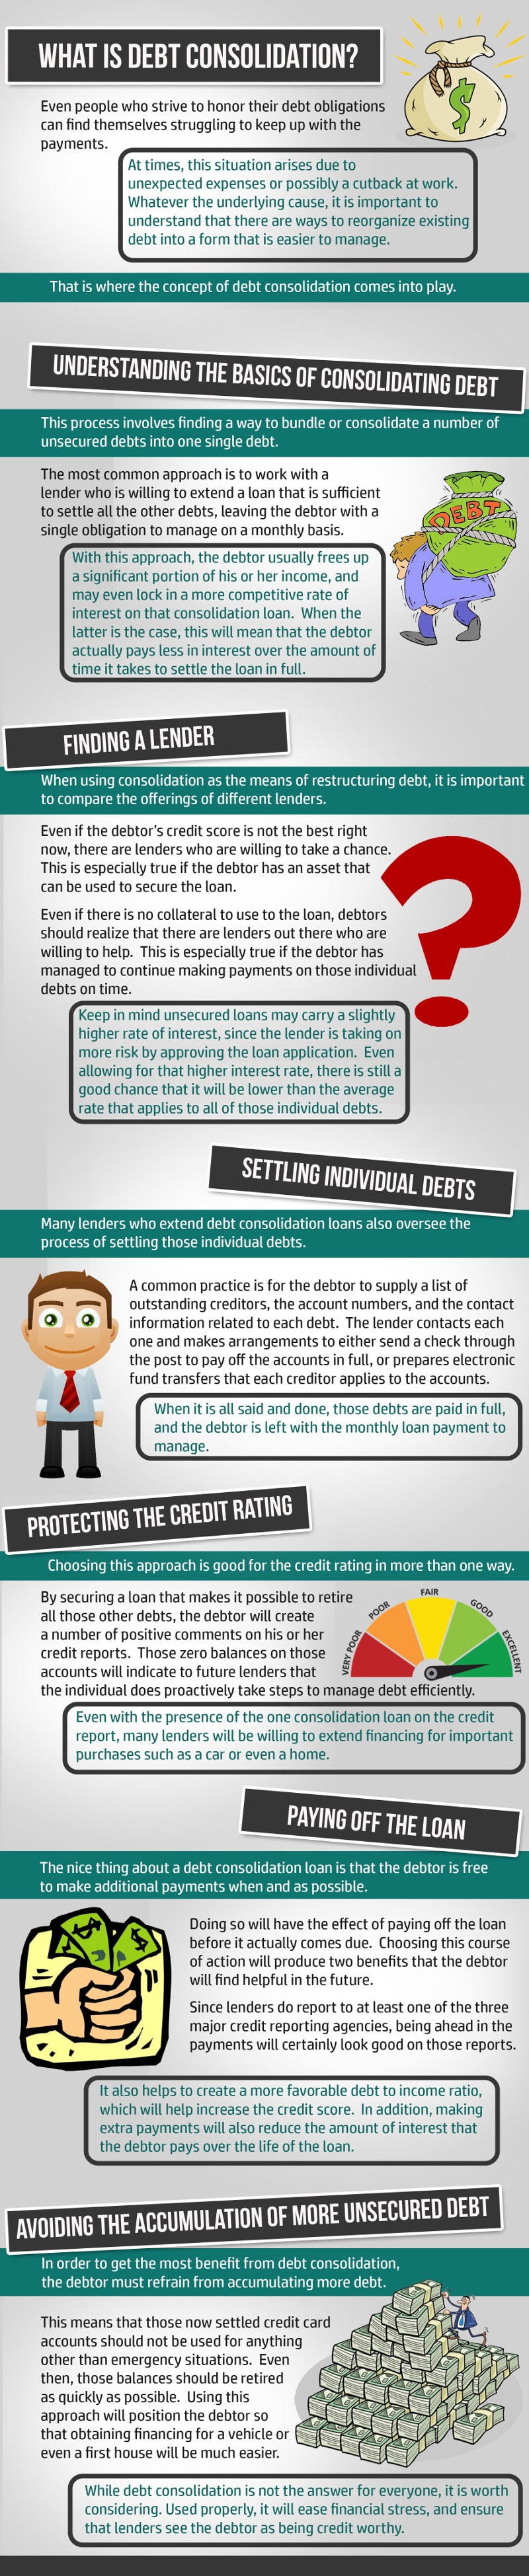 Debt Consolidation Process Explained - Infographic